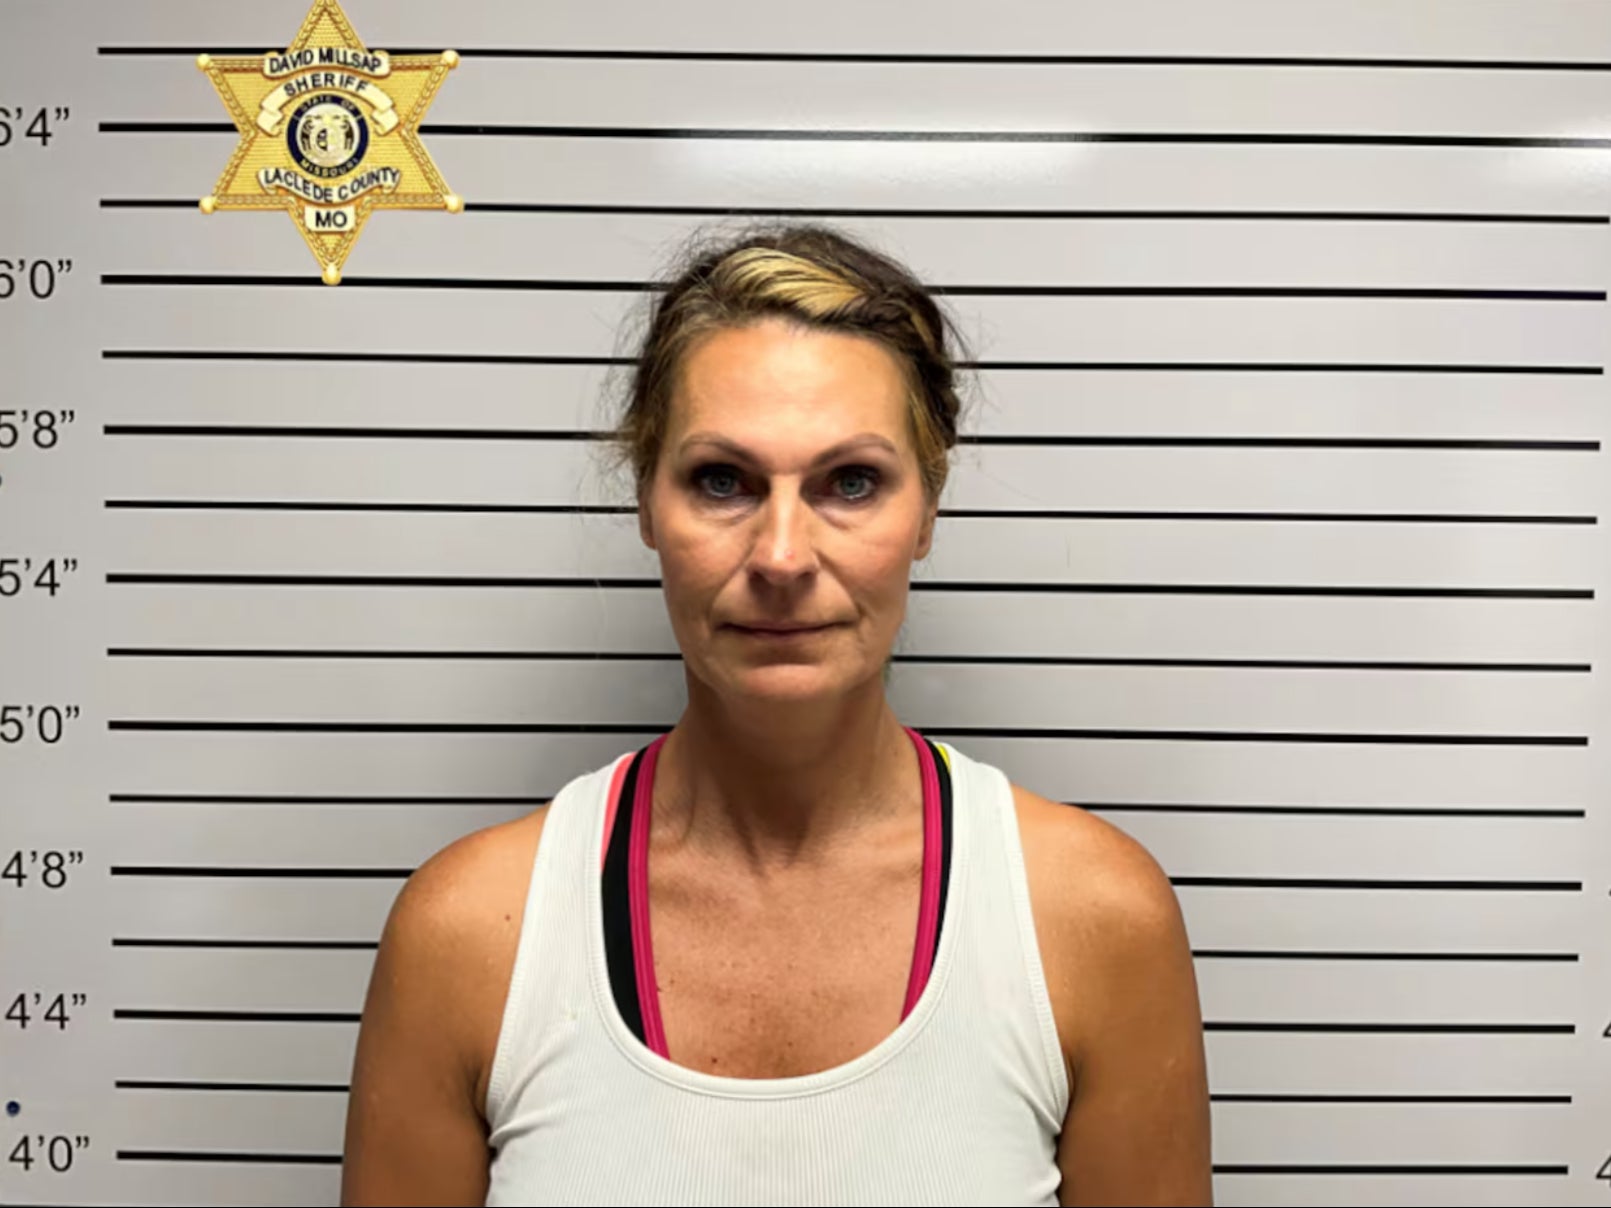 Michelle Y Peters, 47, has been charged with first-degree domestic assault and armed criminal action for allegedly poisoning her husband by mixing Roundup and insecticides with his Mountain Dew sodas